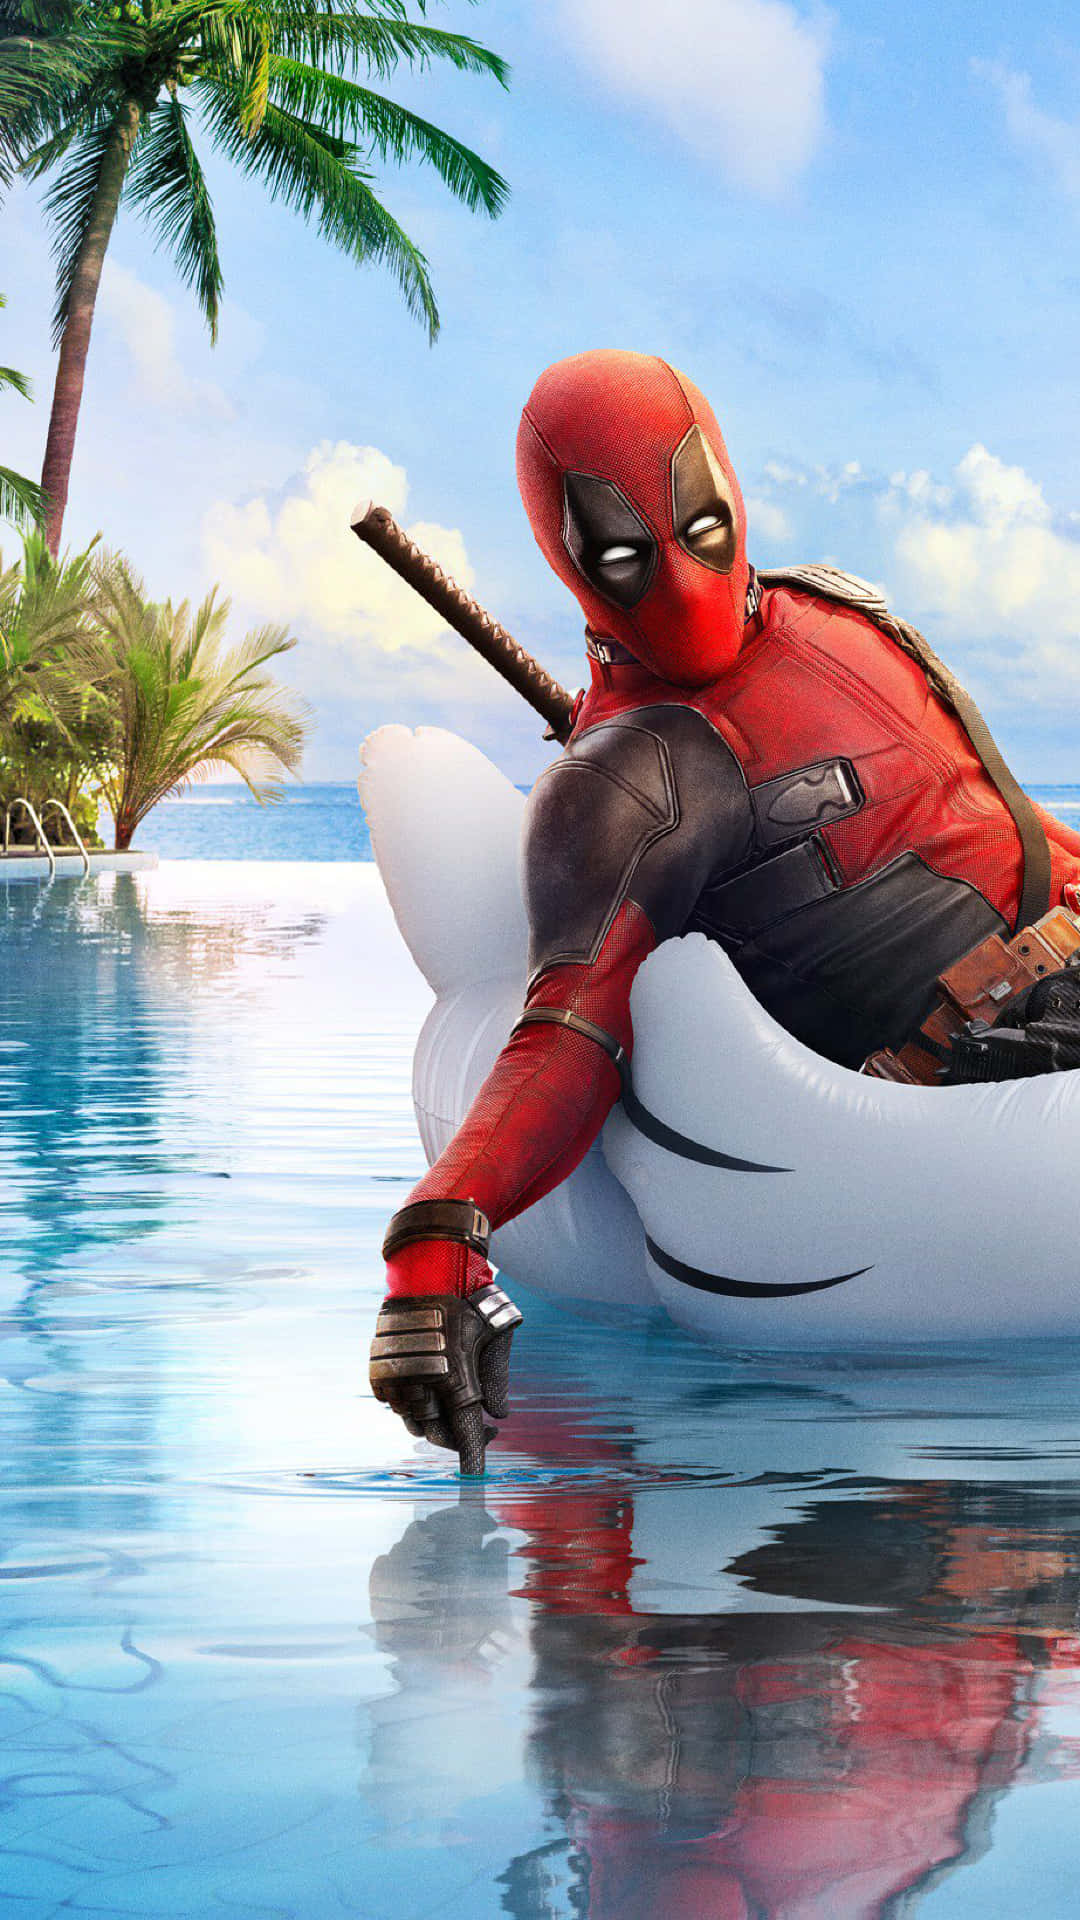 Add some flare to your phone - upgrade to a Deadpool Iphone! Wallpaper